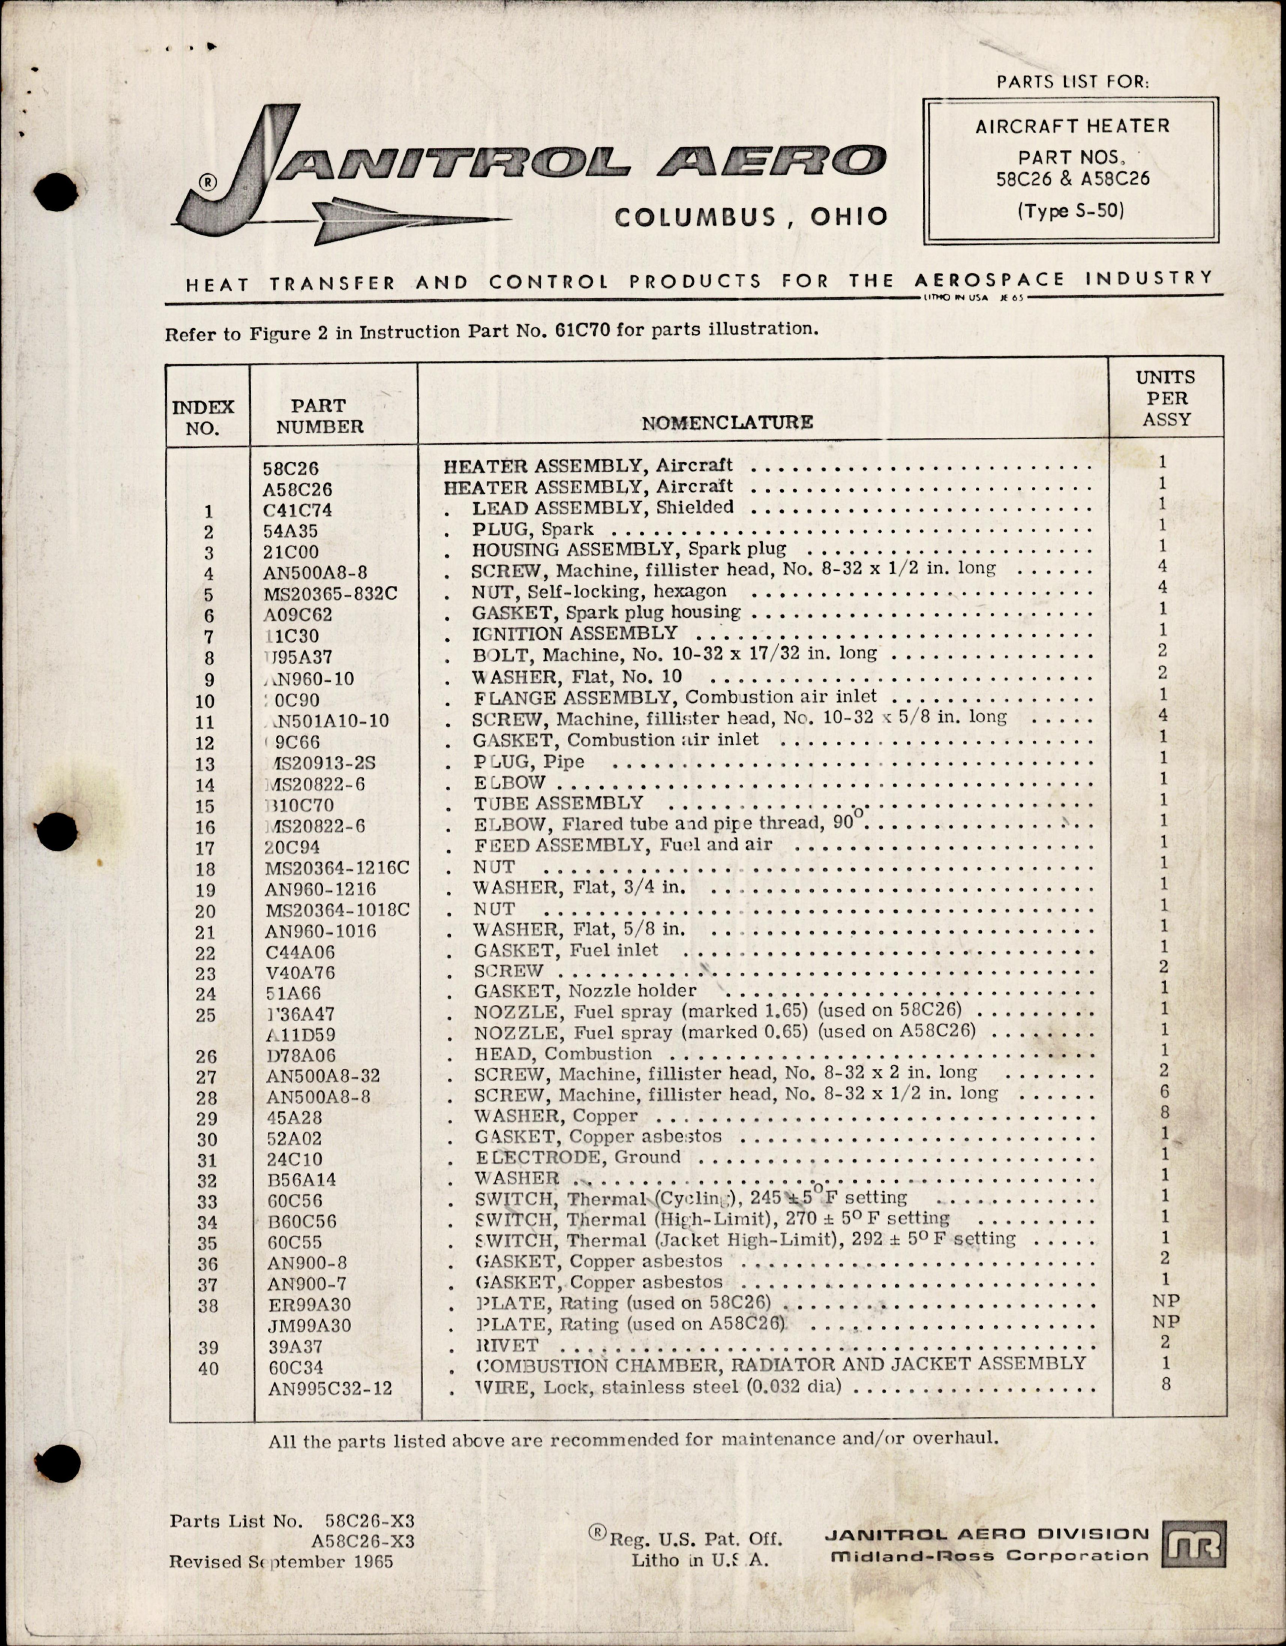 Sample page 1 from AirCorps Library document: Parts List  for Aircraft Heater - Type S-50 - Parts 58C26-X3 and A58C26-X3 